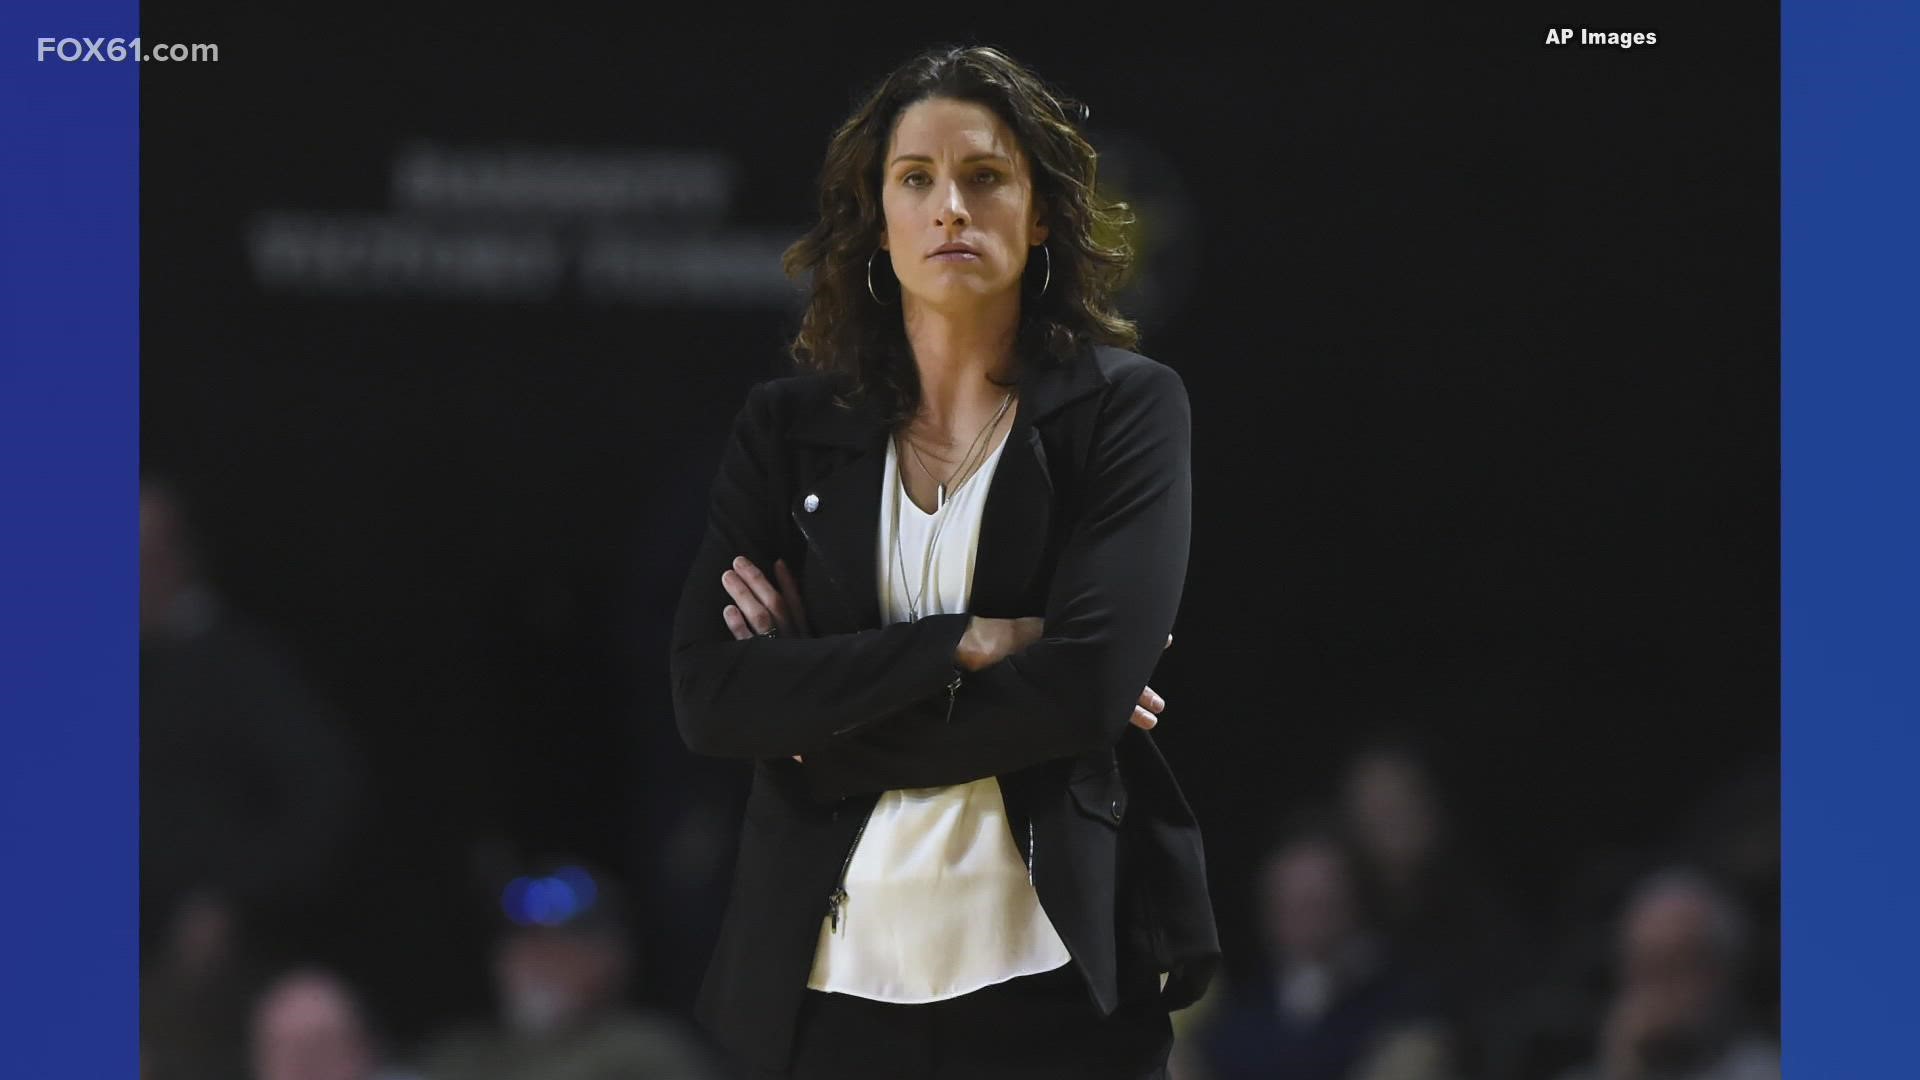 White, who has a combined 15 seasons of experience as a player and coach in the WNBA, replaces former head coach Curt Miller. She is the franchise's sixth head coach